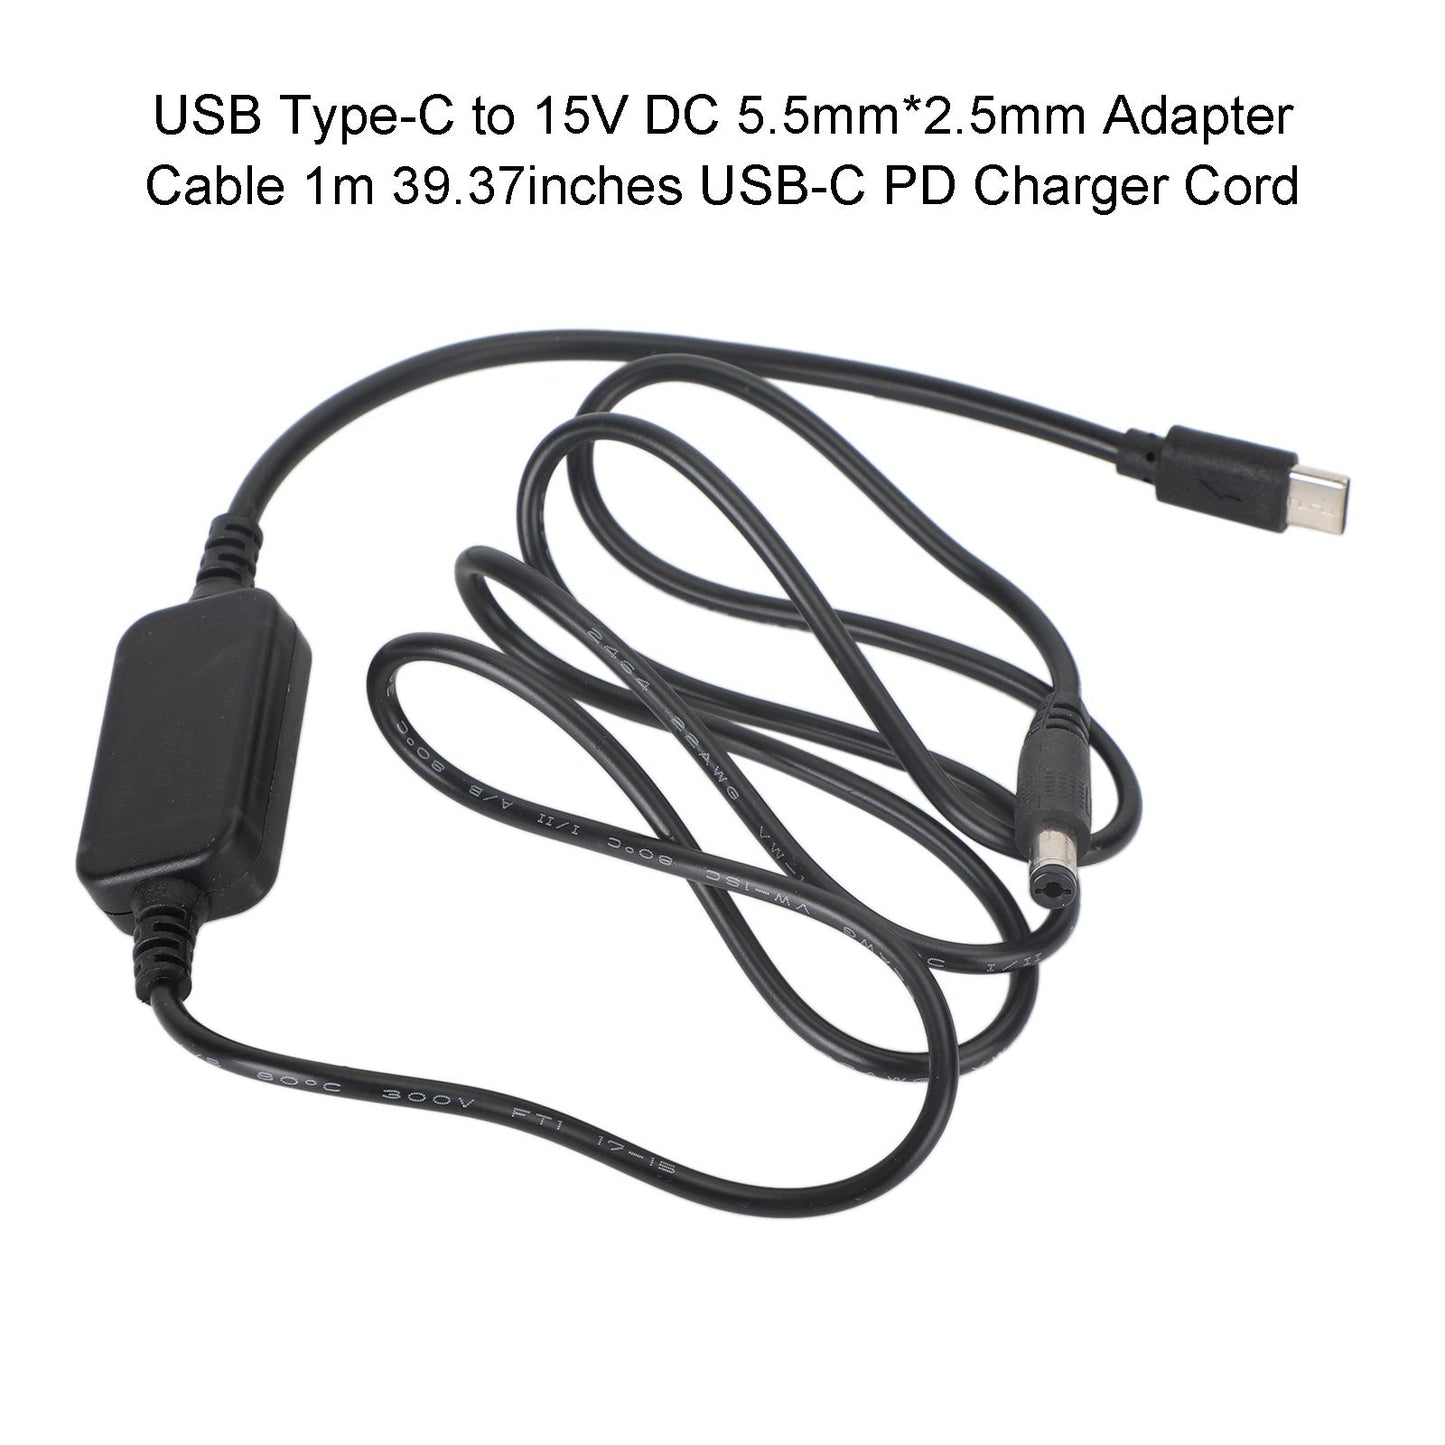 USB Type-C to 12V DC 5.5mm*2.5mm Adapter Cable 1m 39.37inches PD Charger Cord